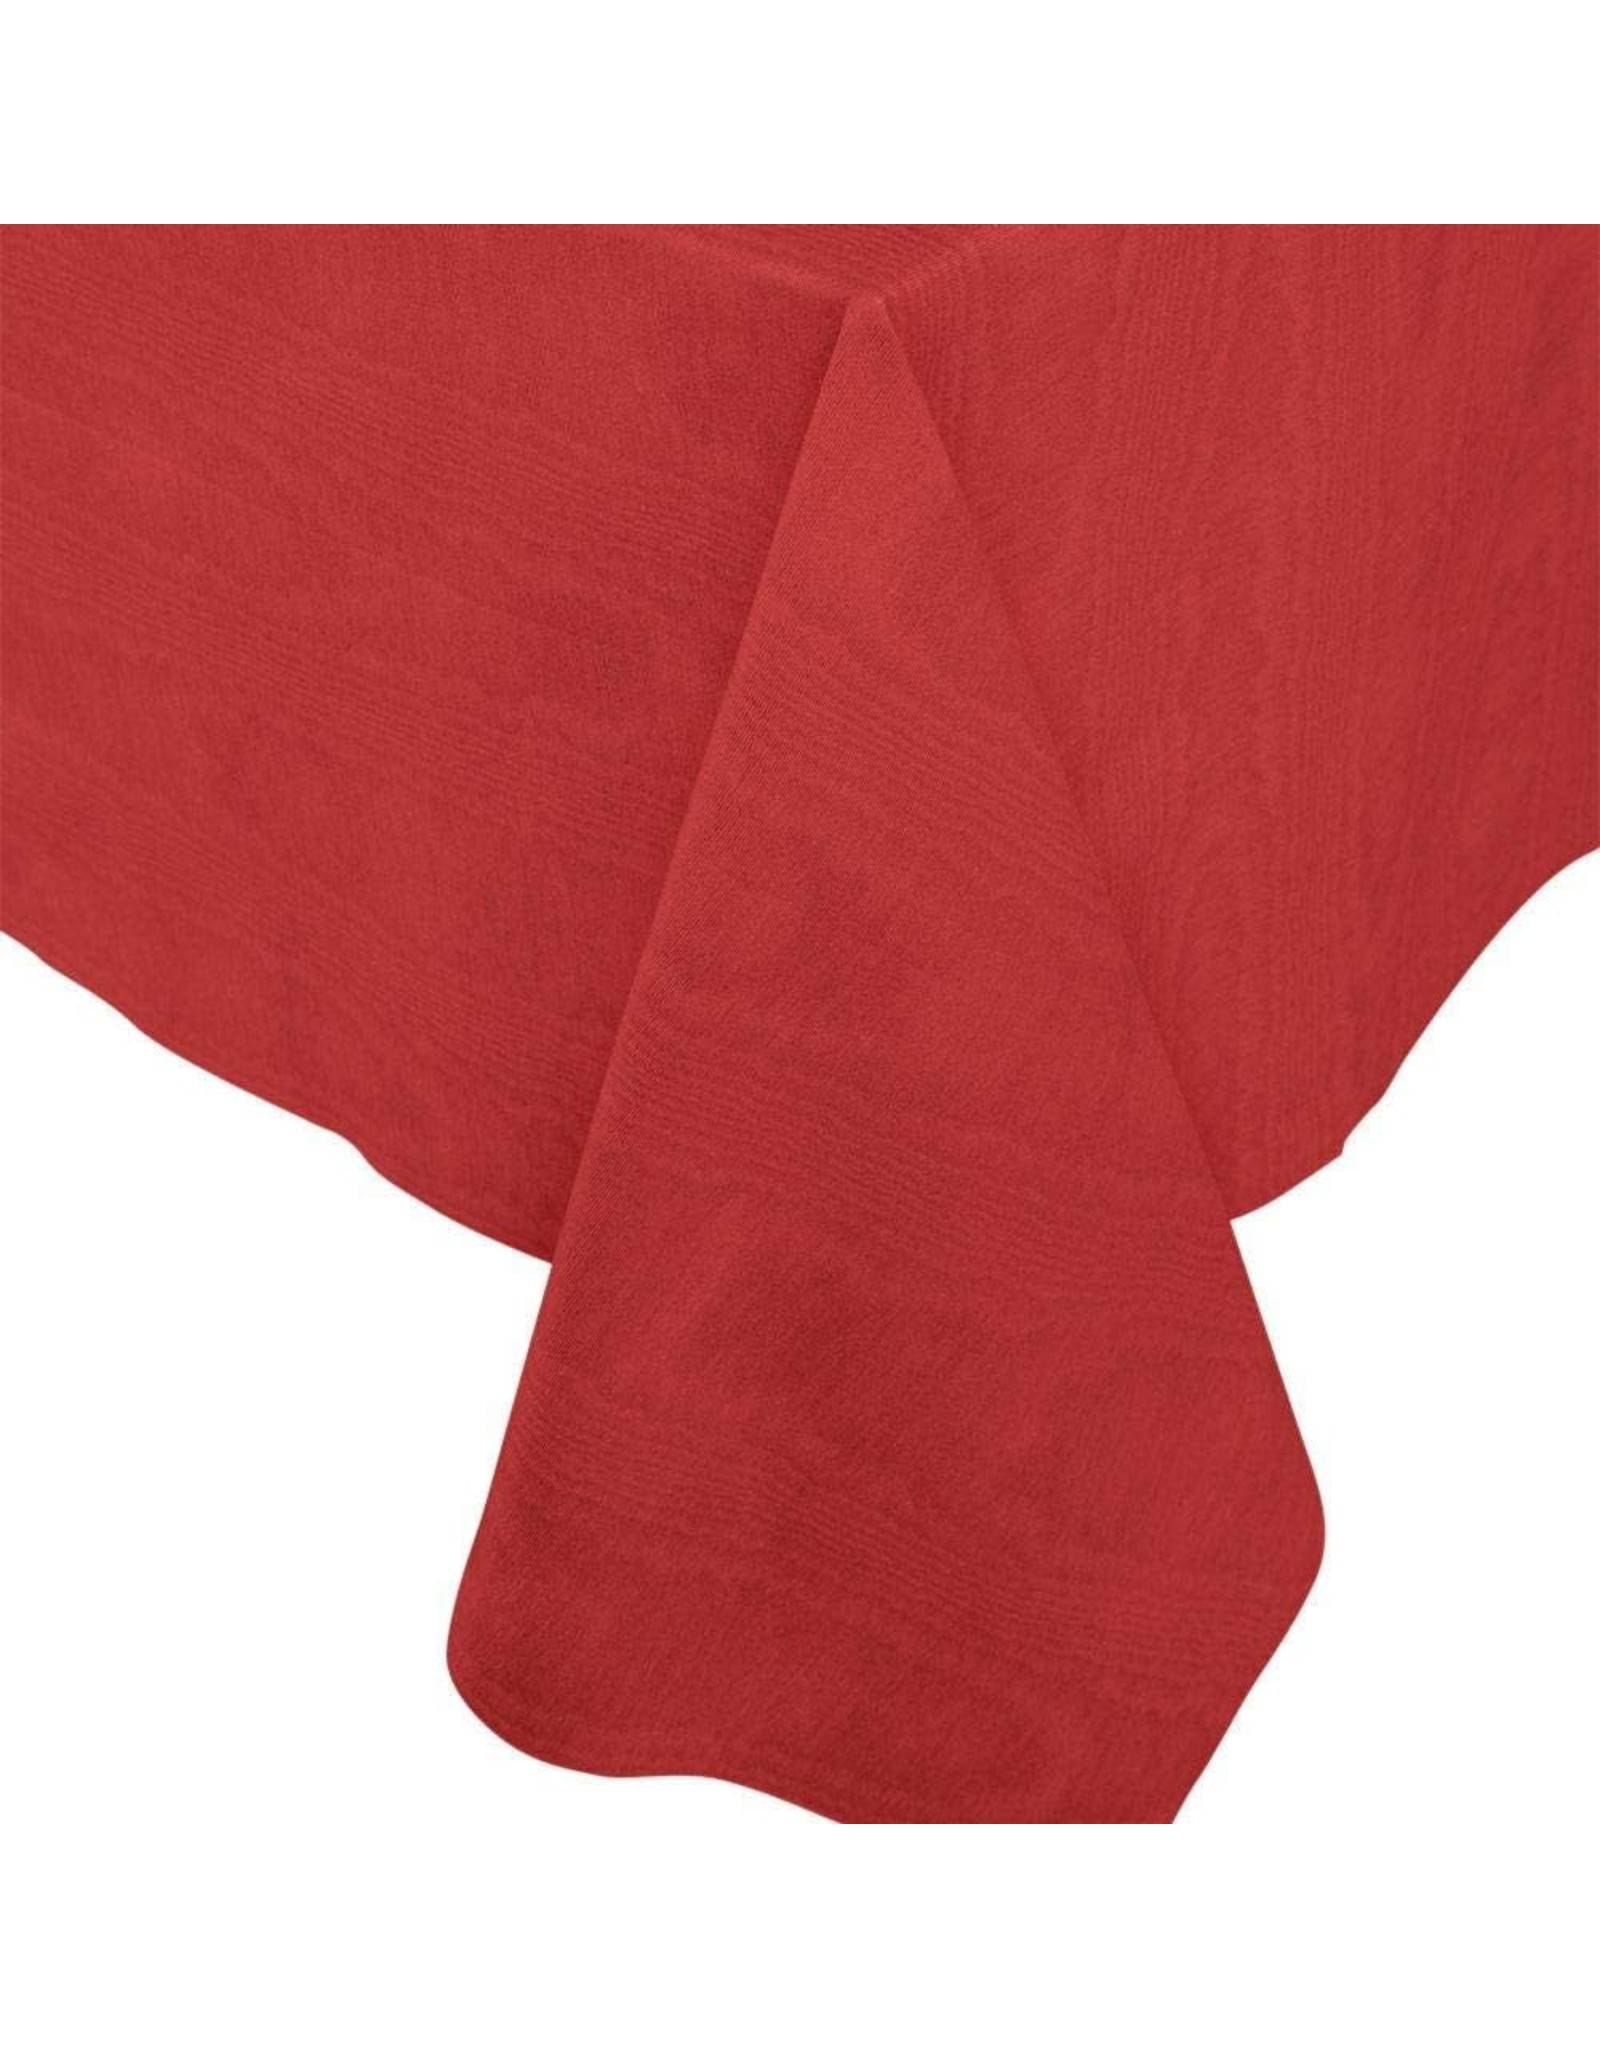 Caspari Paper Linen Moire Printed Table Cover In Red